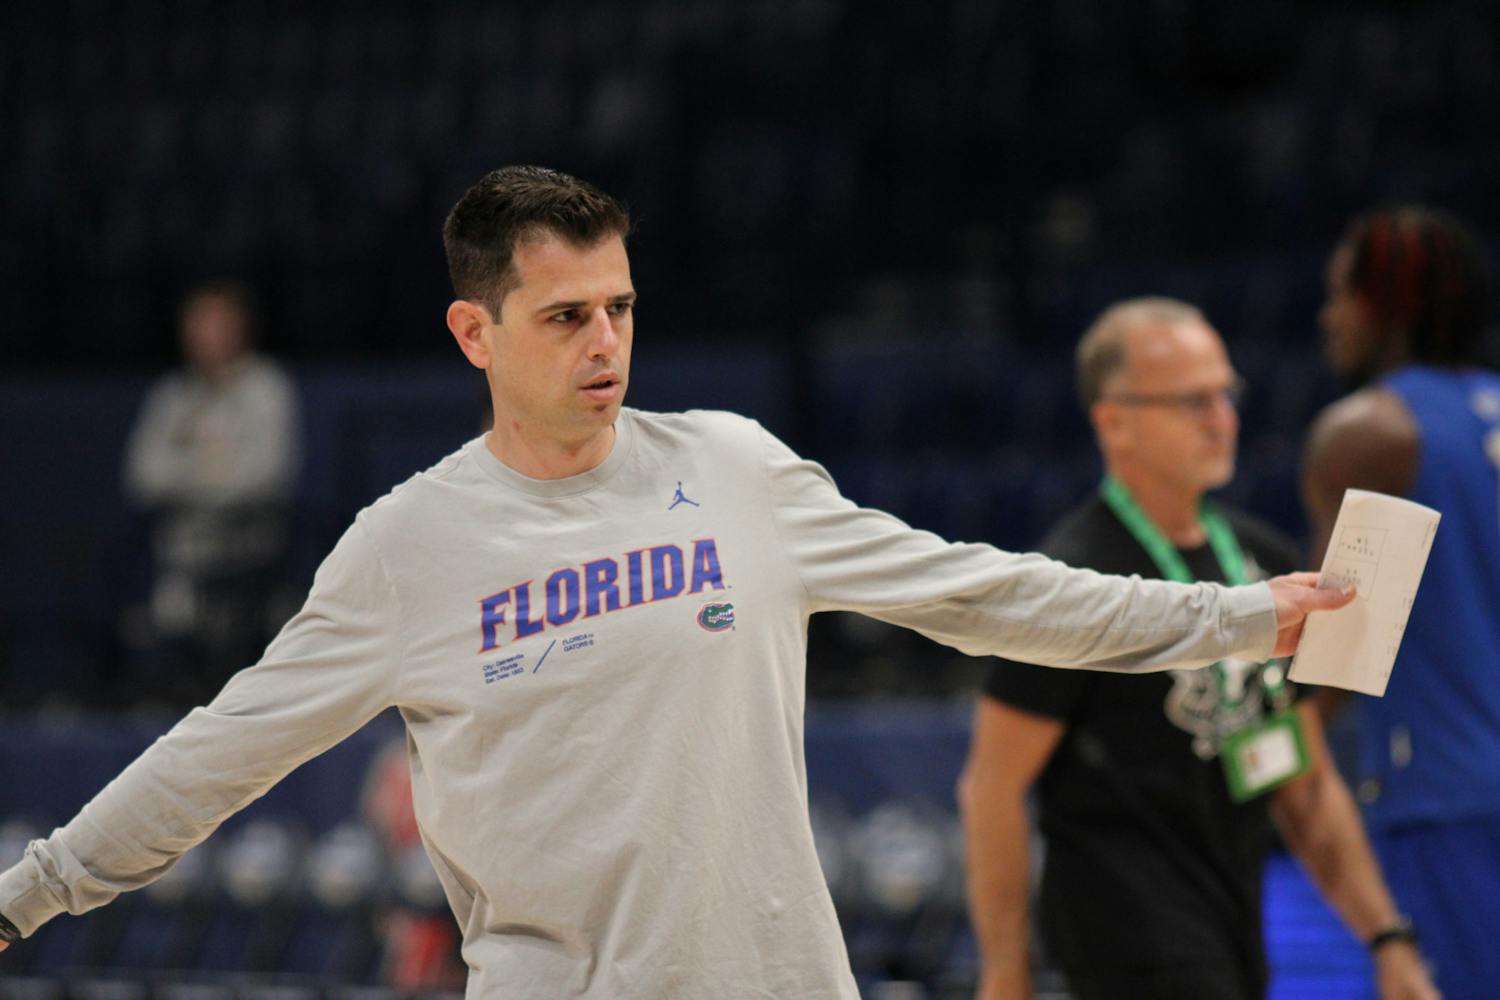 Florida head coach Todd Golden coaches the Gators' during a practice the day before their Southeastern Conference tournament game Wednesday, March 8, 2023.